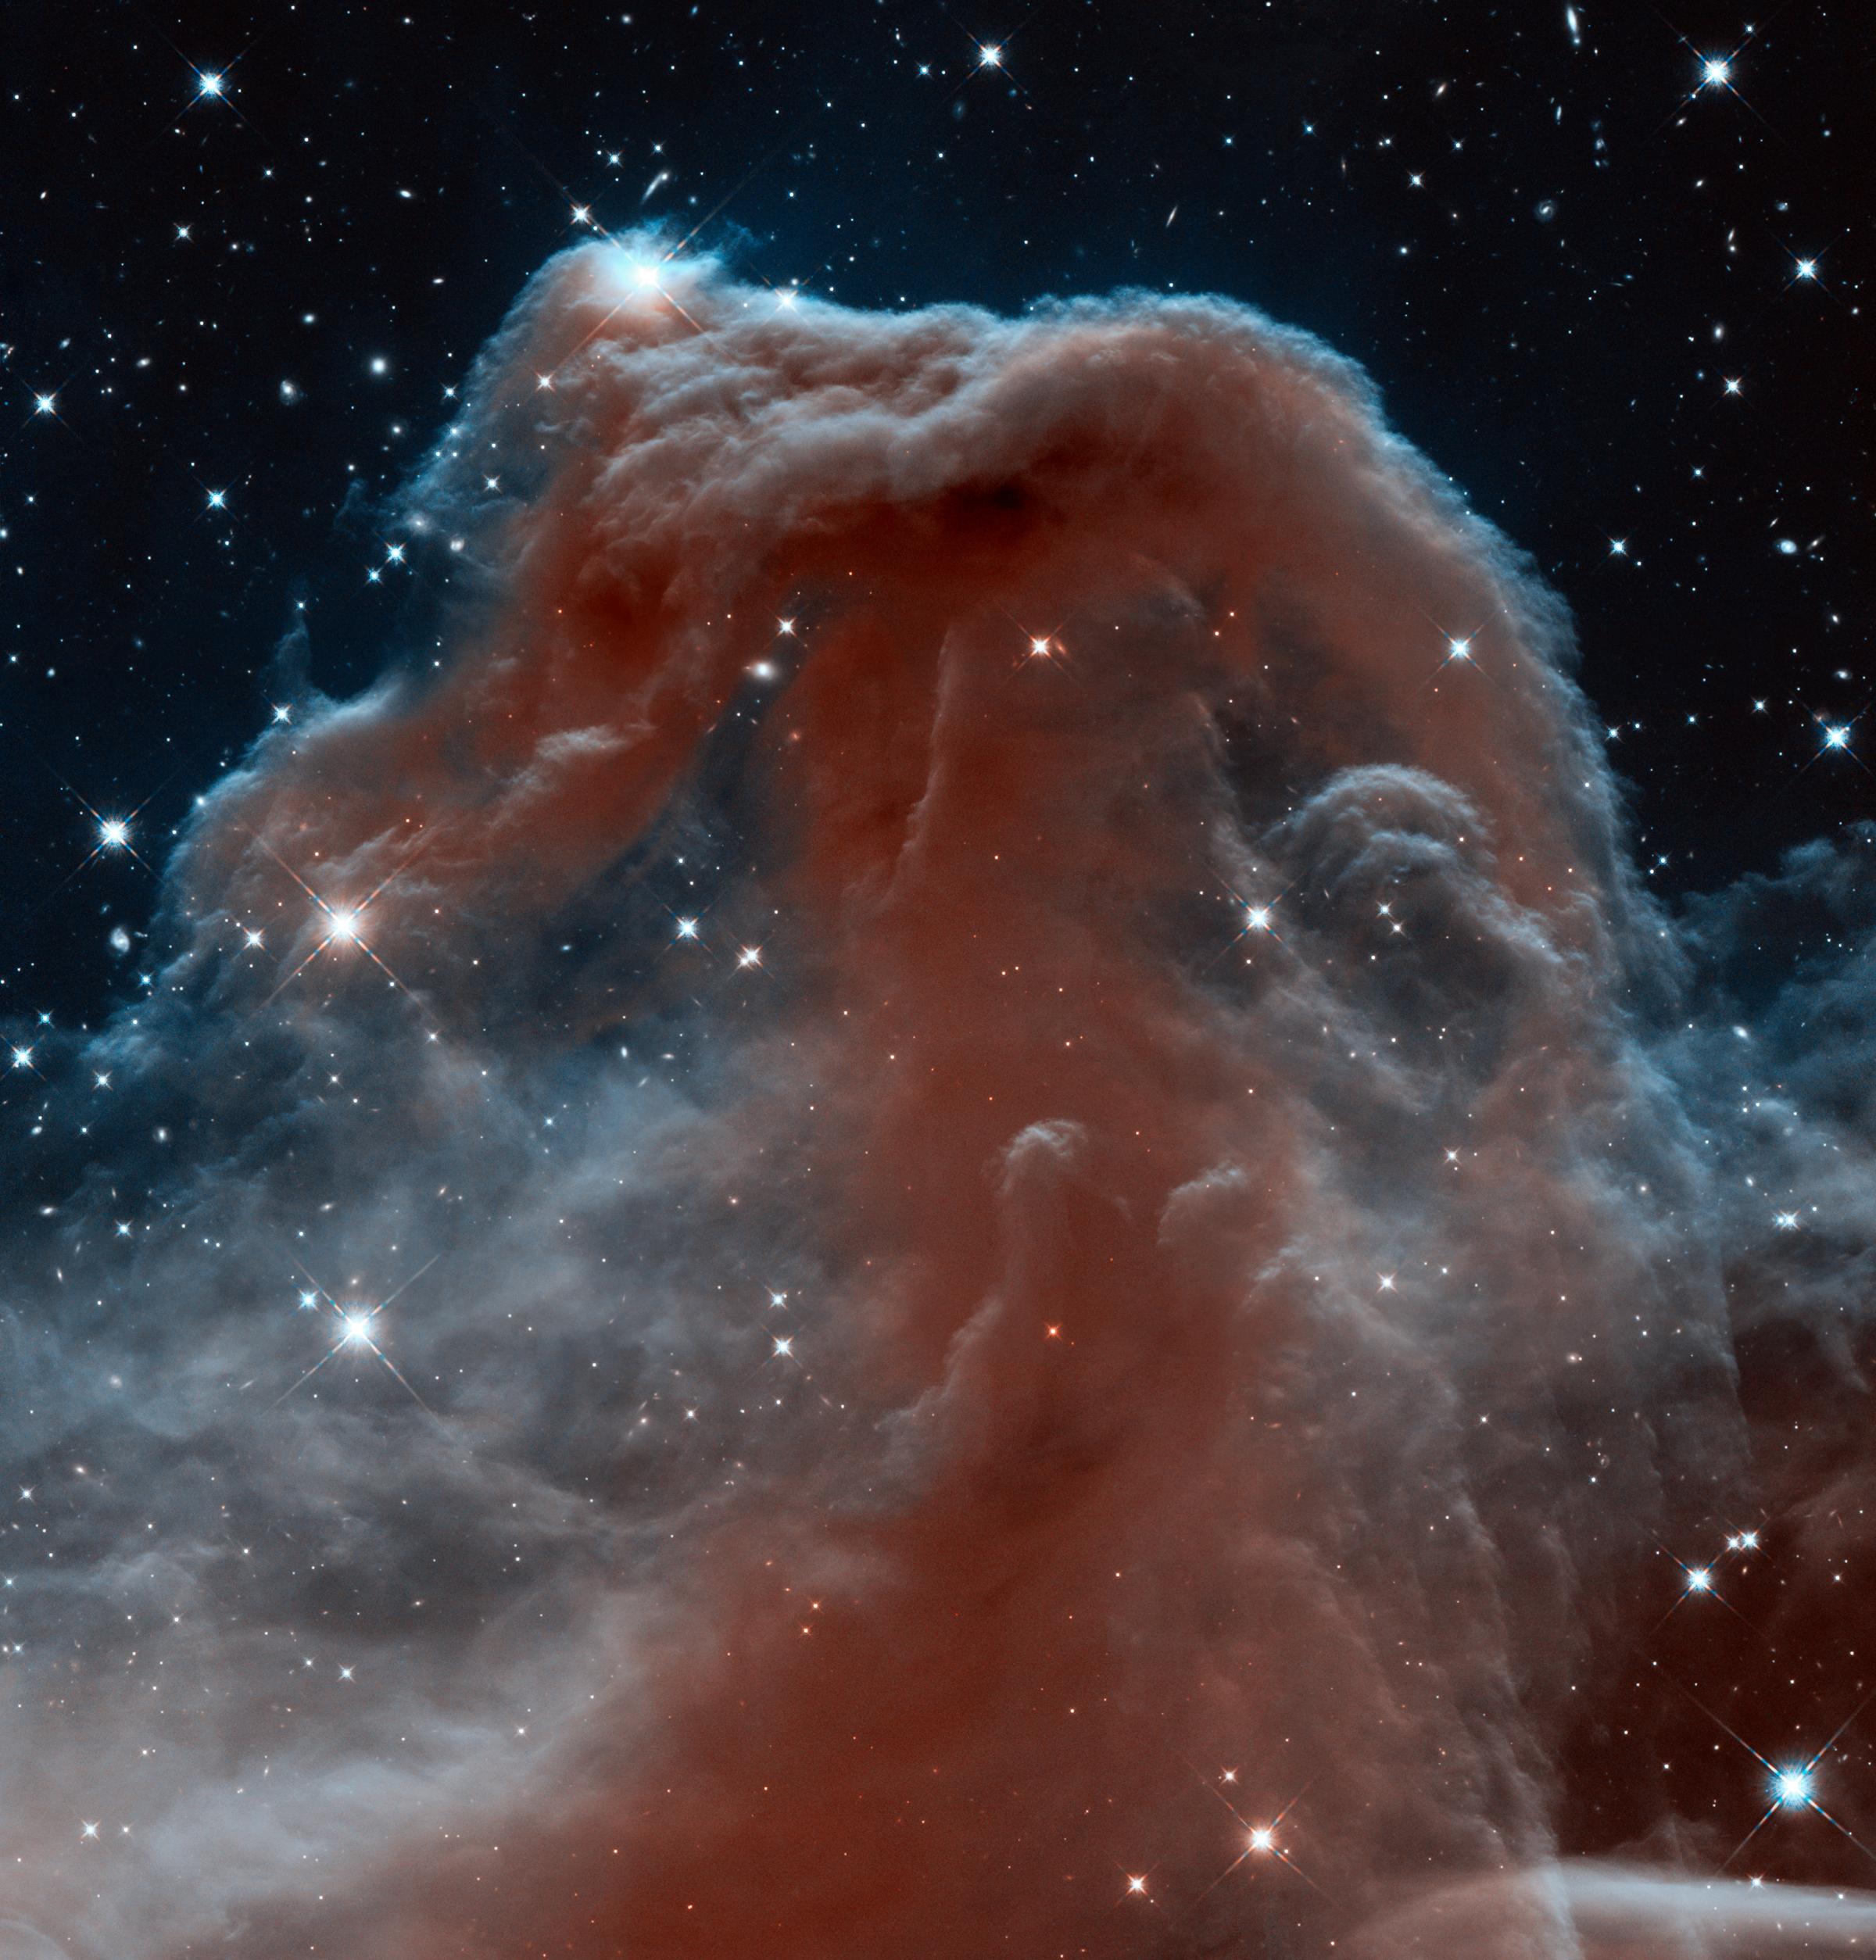 Astronomers used NASA's Hubble Space Telescope to photograph the iconic Horsehead Nebula in an infrared light to mark the 23rd anniversary of the famous observatory's launch aboard the space shuttle Discovery on April 24, 1990.